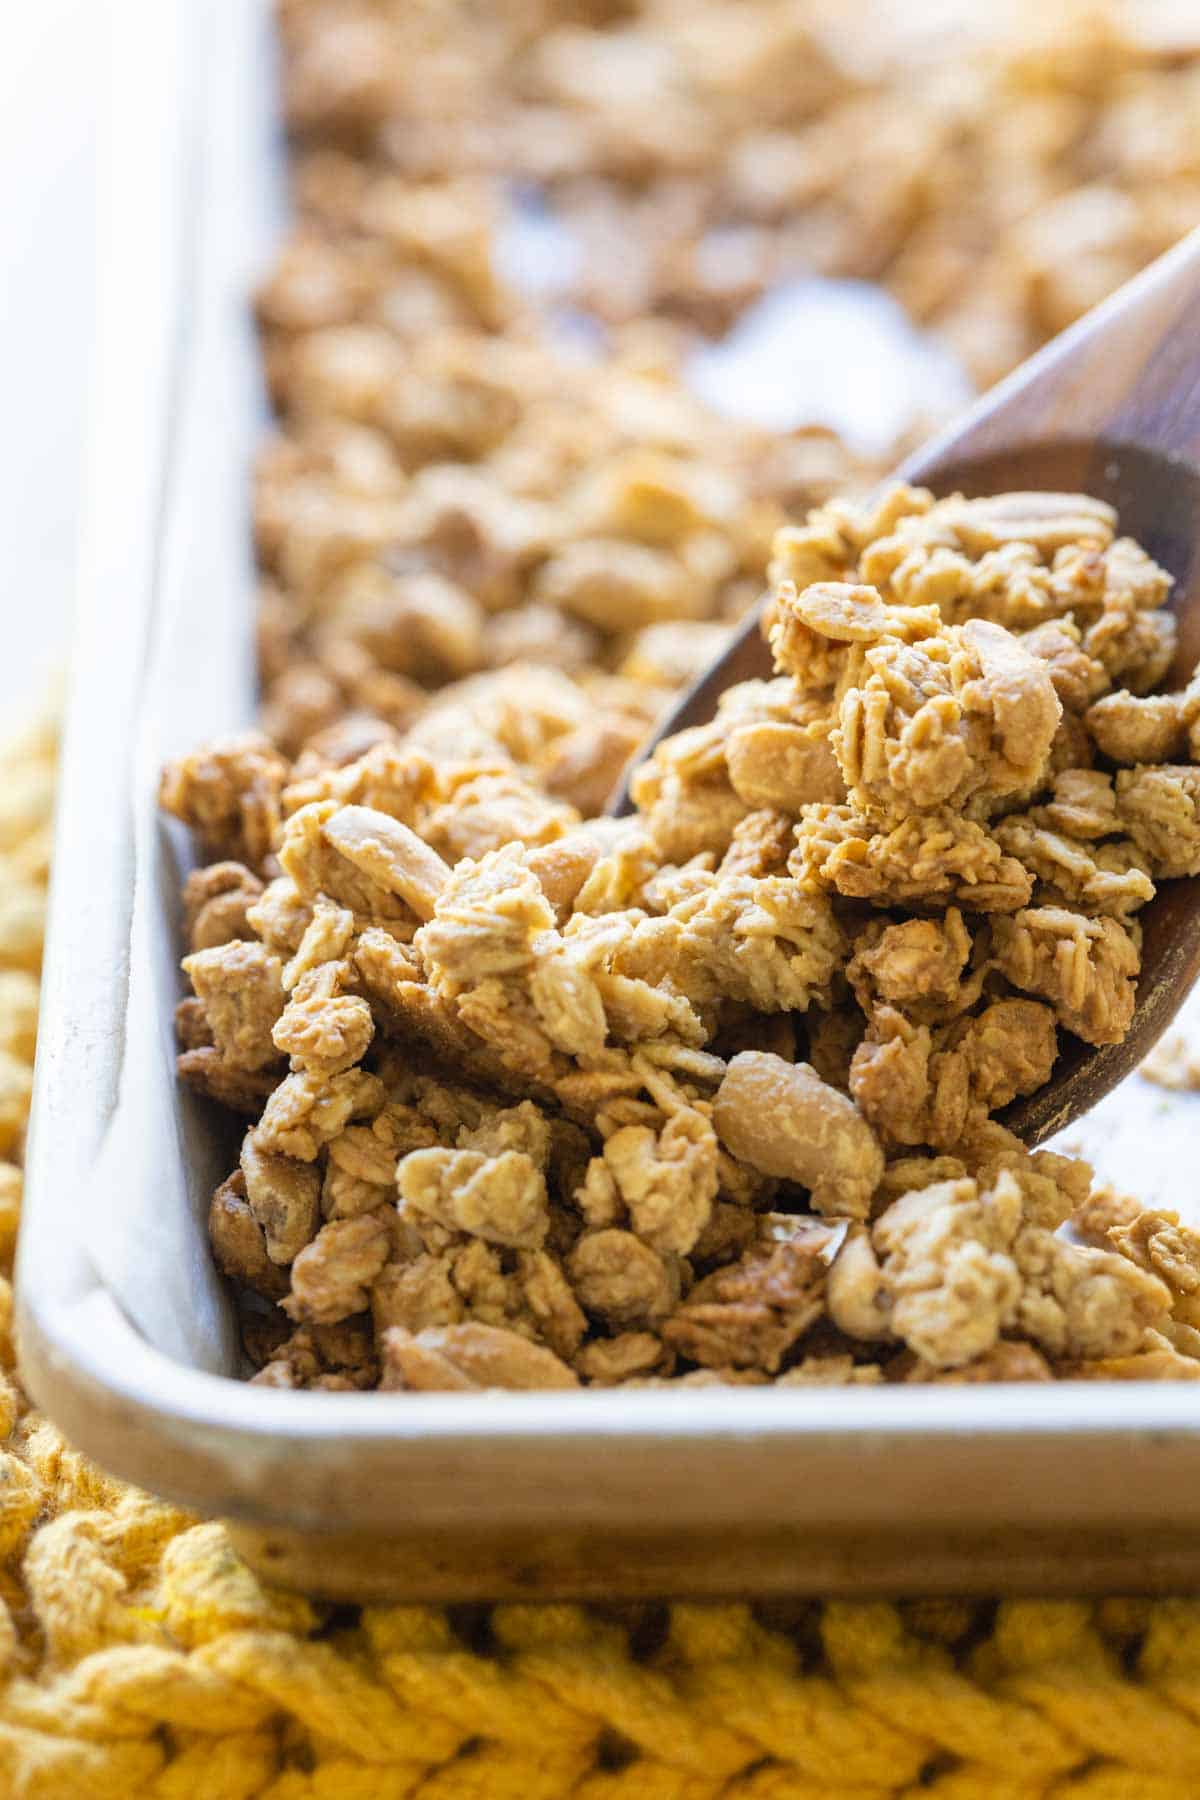 Close-up of baked peanut butter granola on a baking sheet.